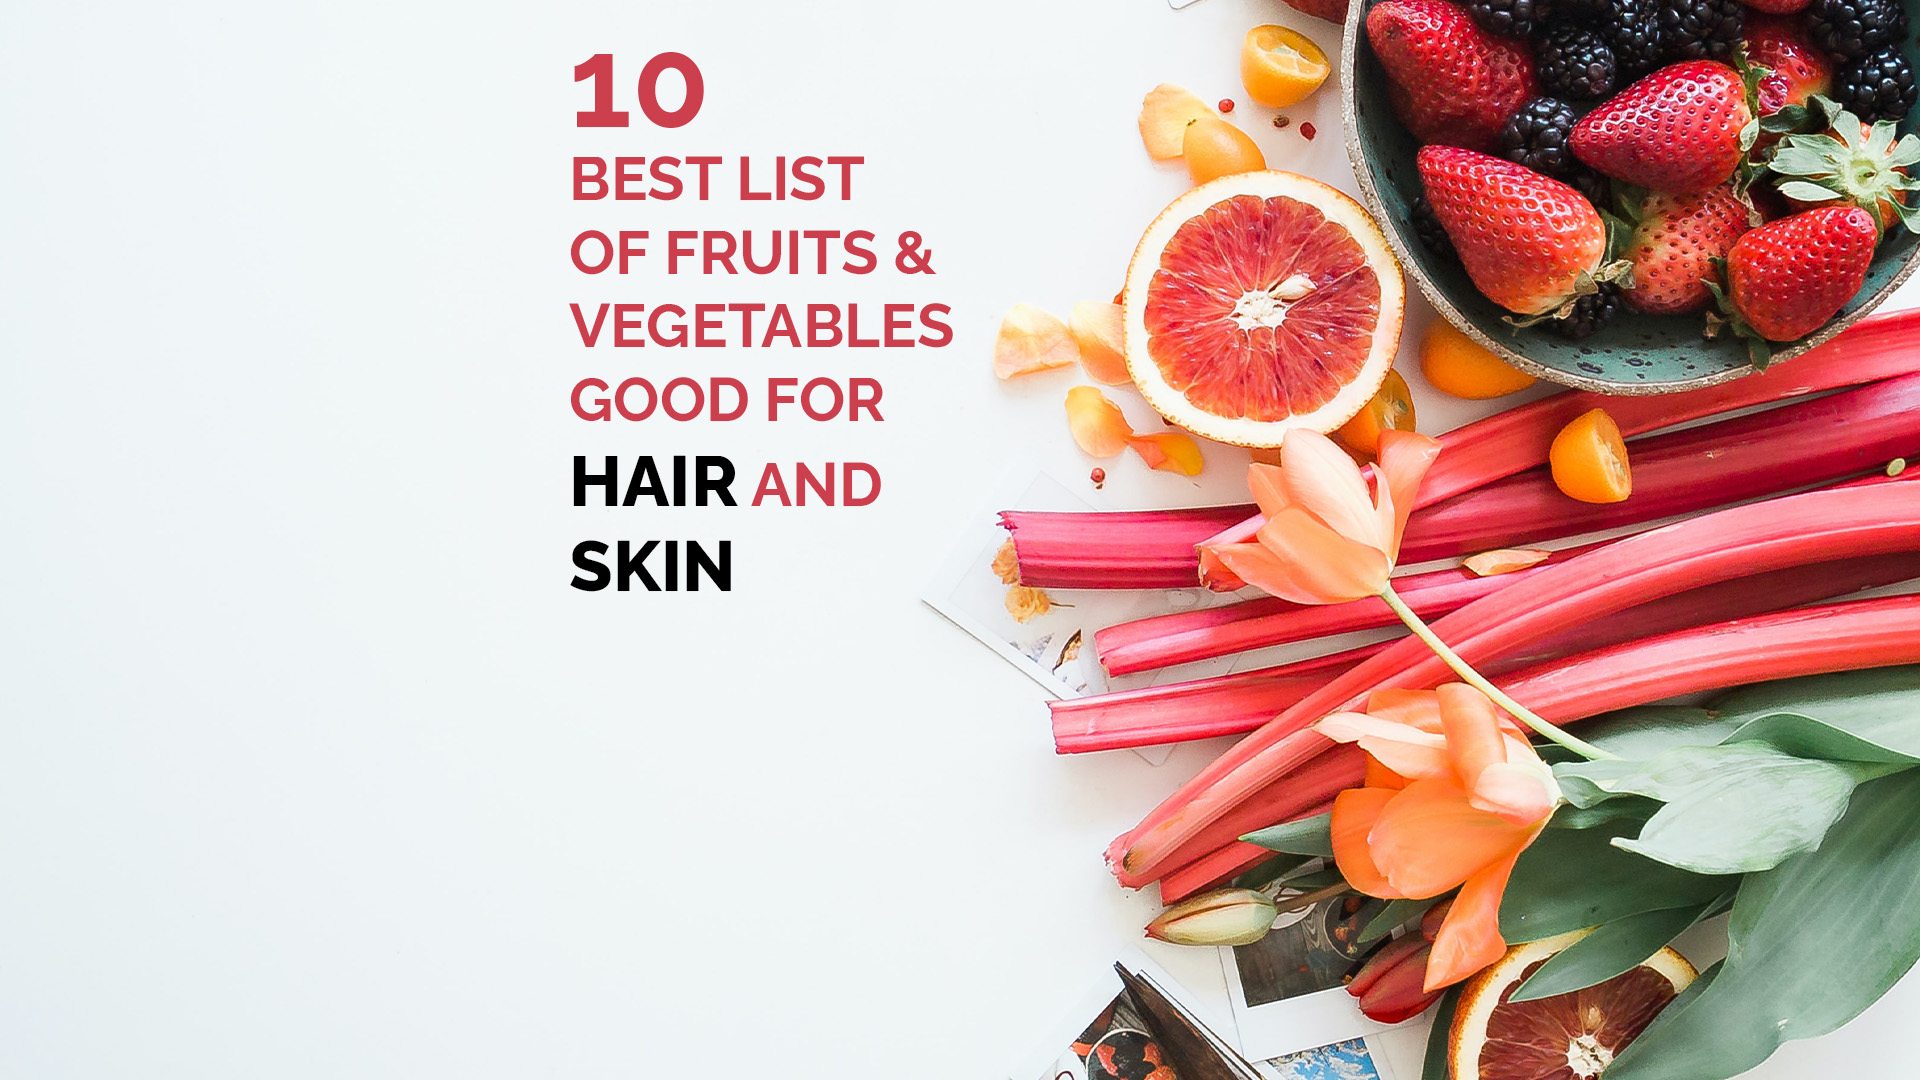 10 Best List of Fruits & Vegetables Good For Hair And Skin